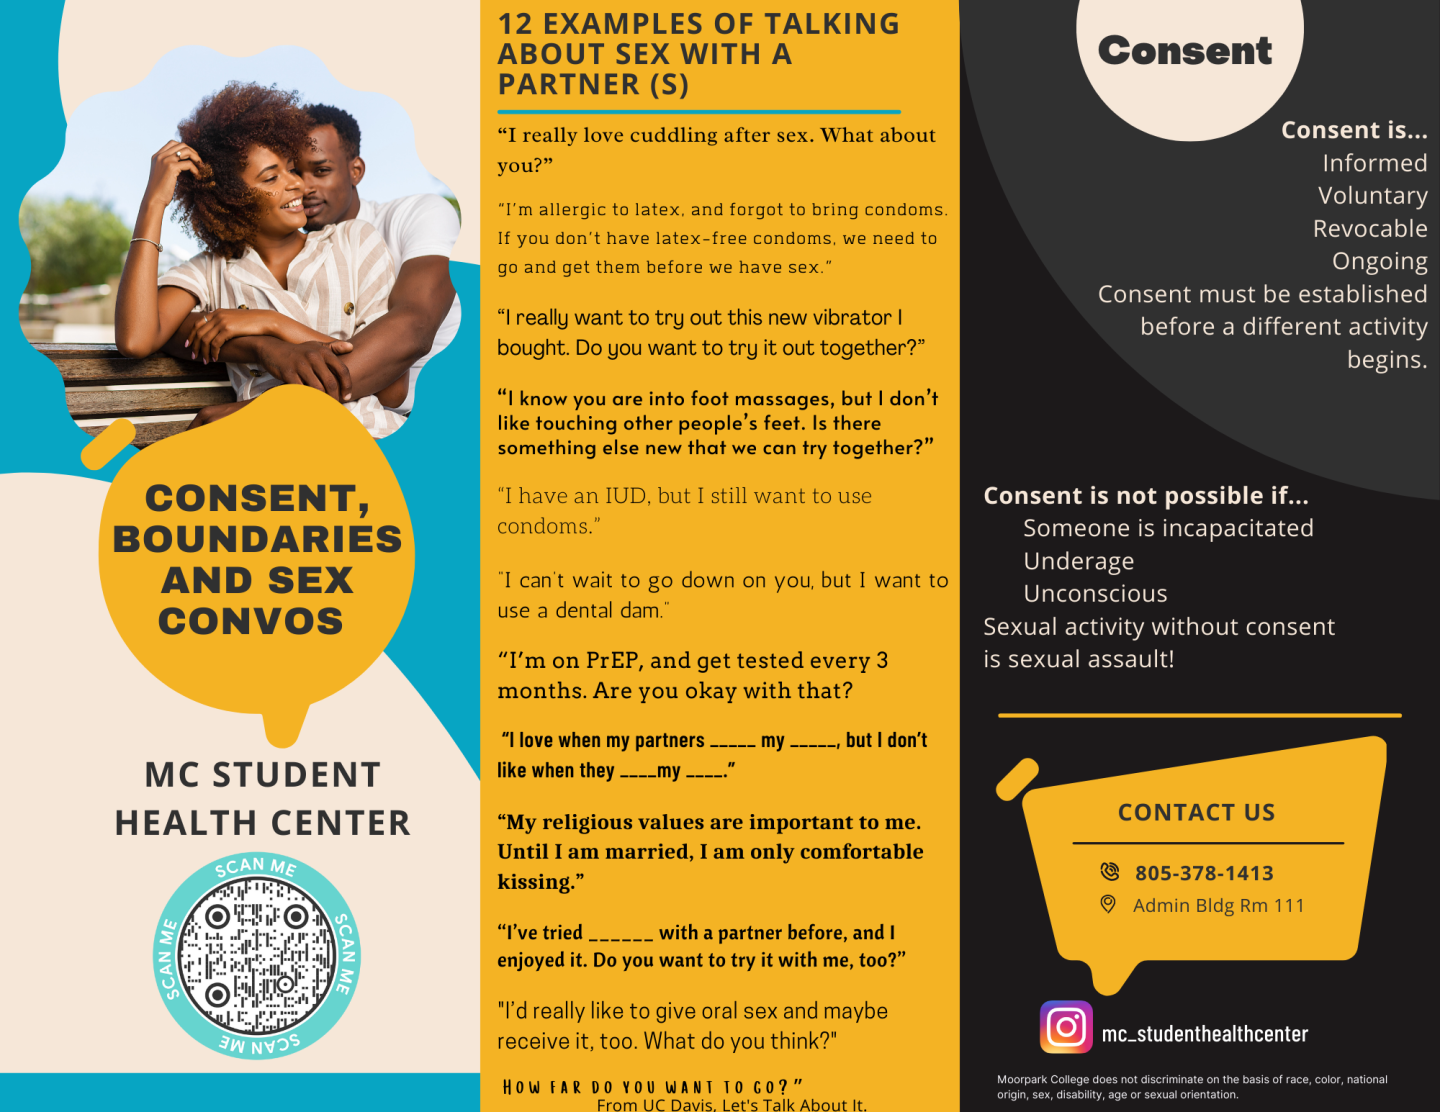 Outside of brochure Consent, Boundaries, and Sex Convos